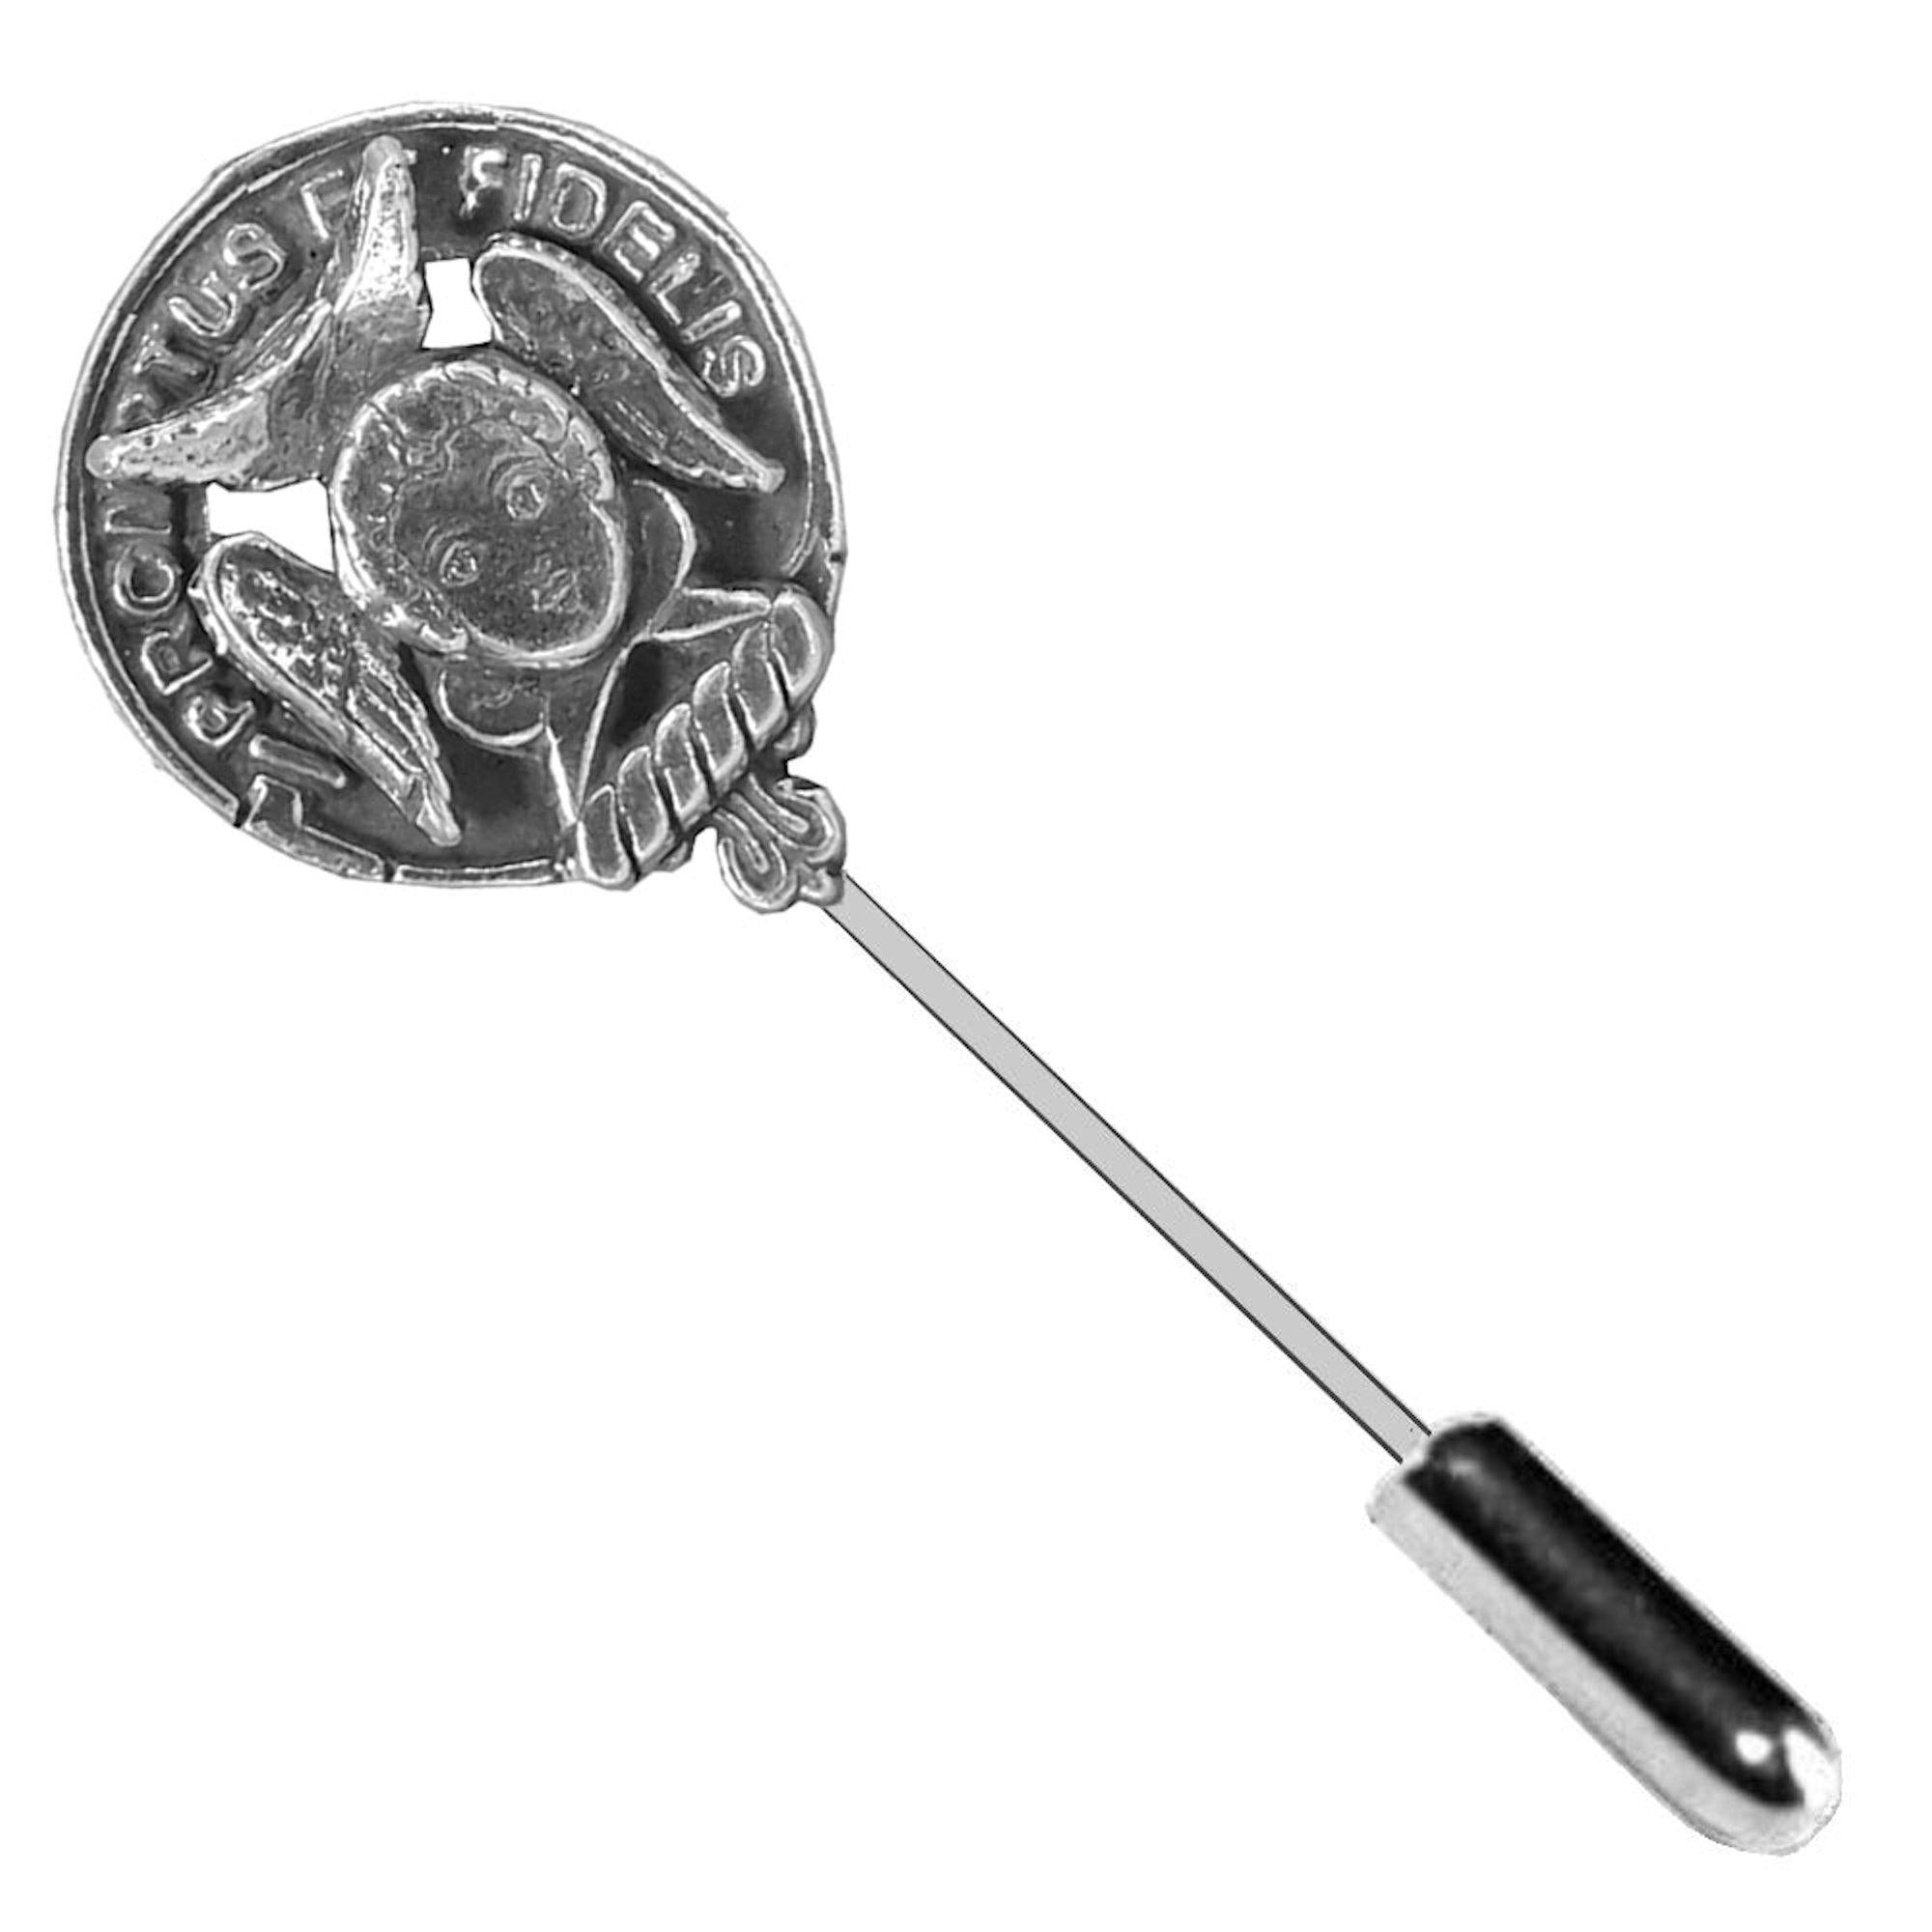 Carruthers Clan Crest Stick or Cravat pin, Sterling Silver